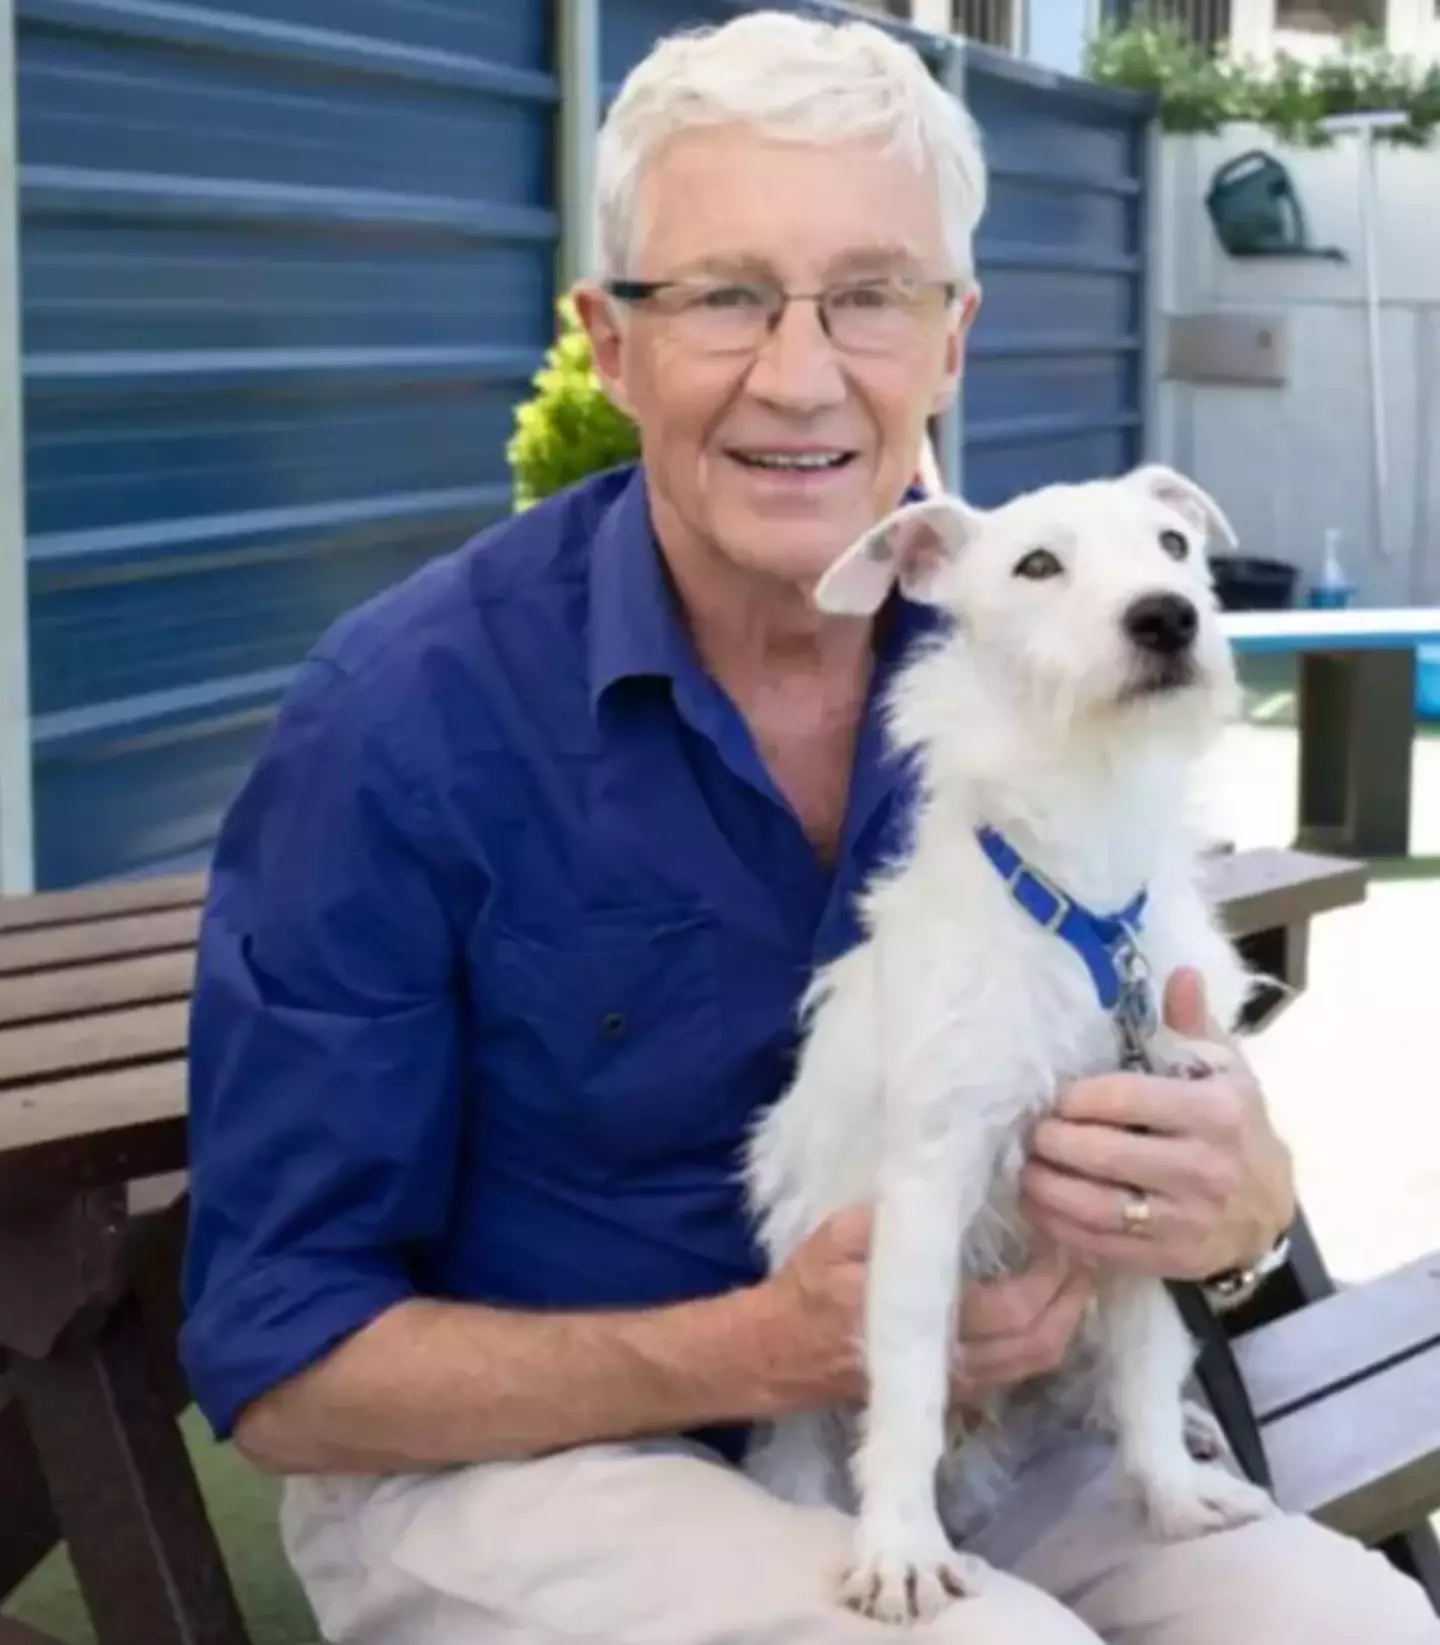 Paul O'Grady had hosted the show from 2012.